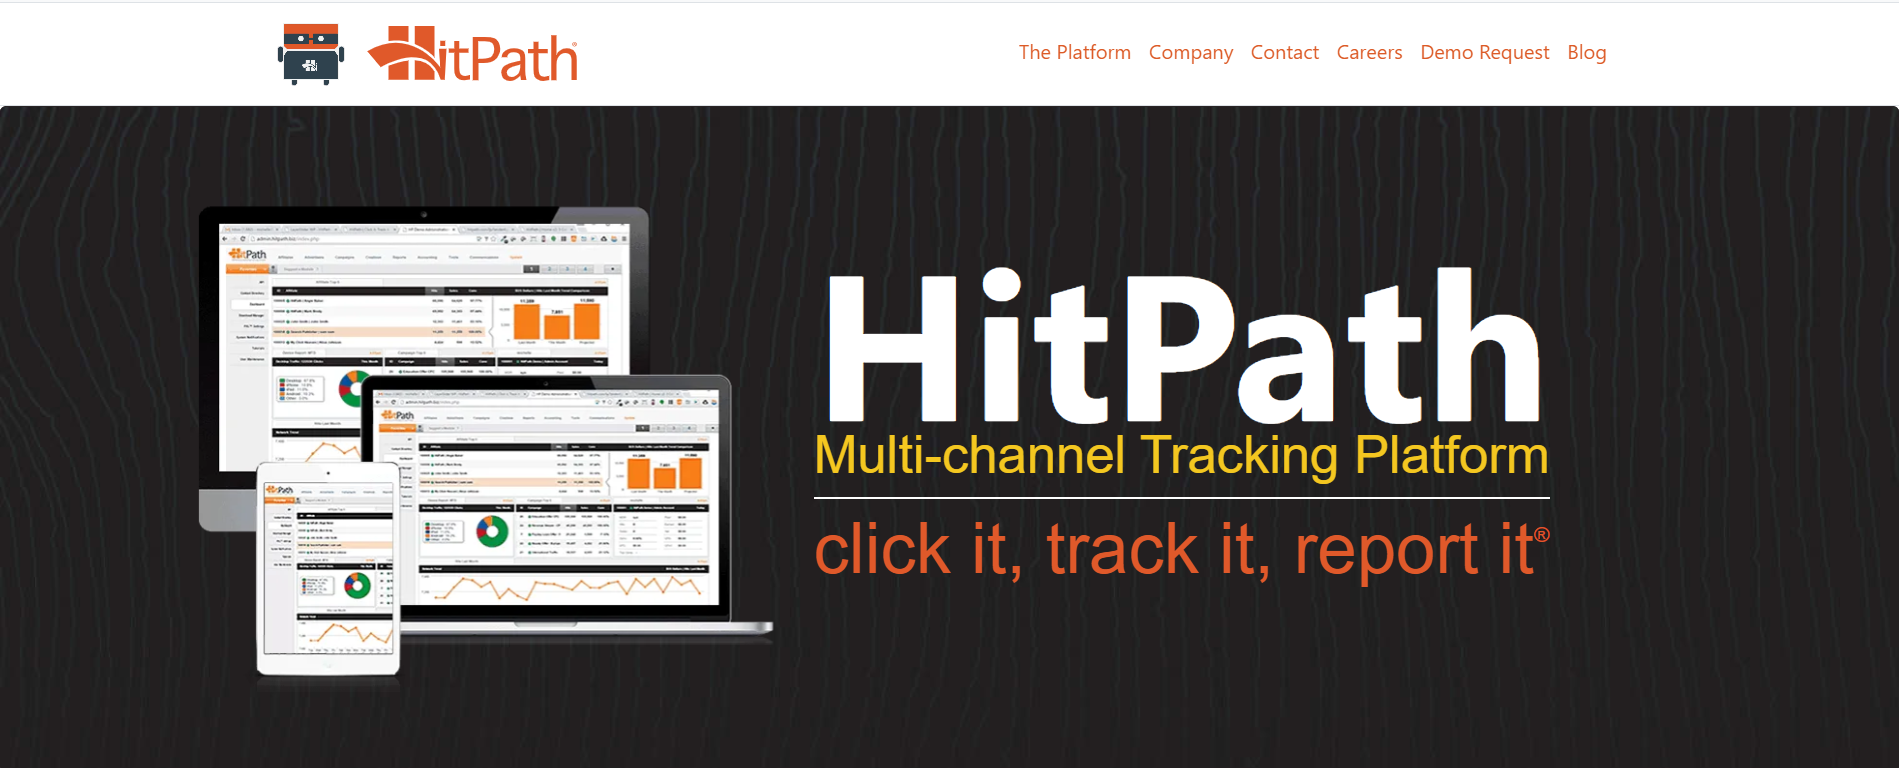 Hitpath-Overview